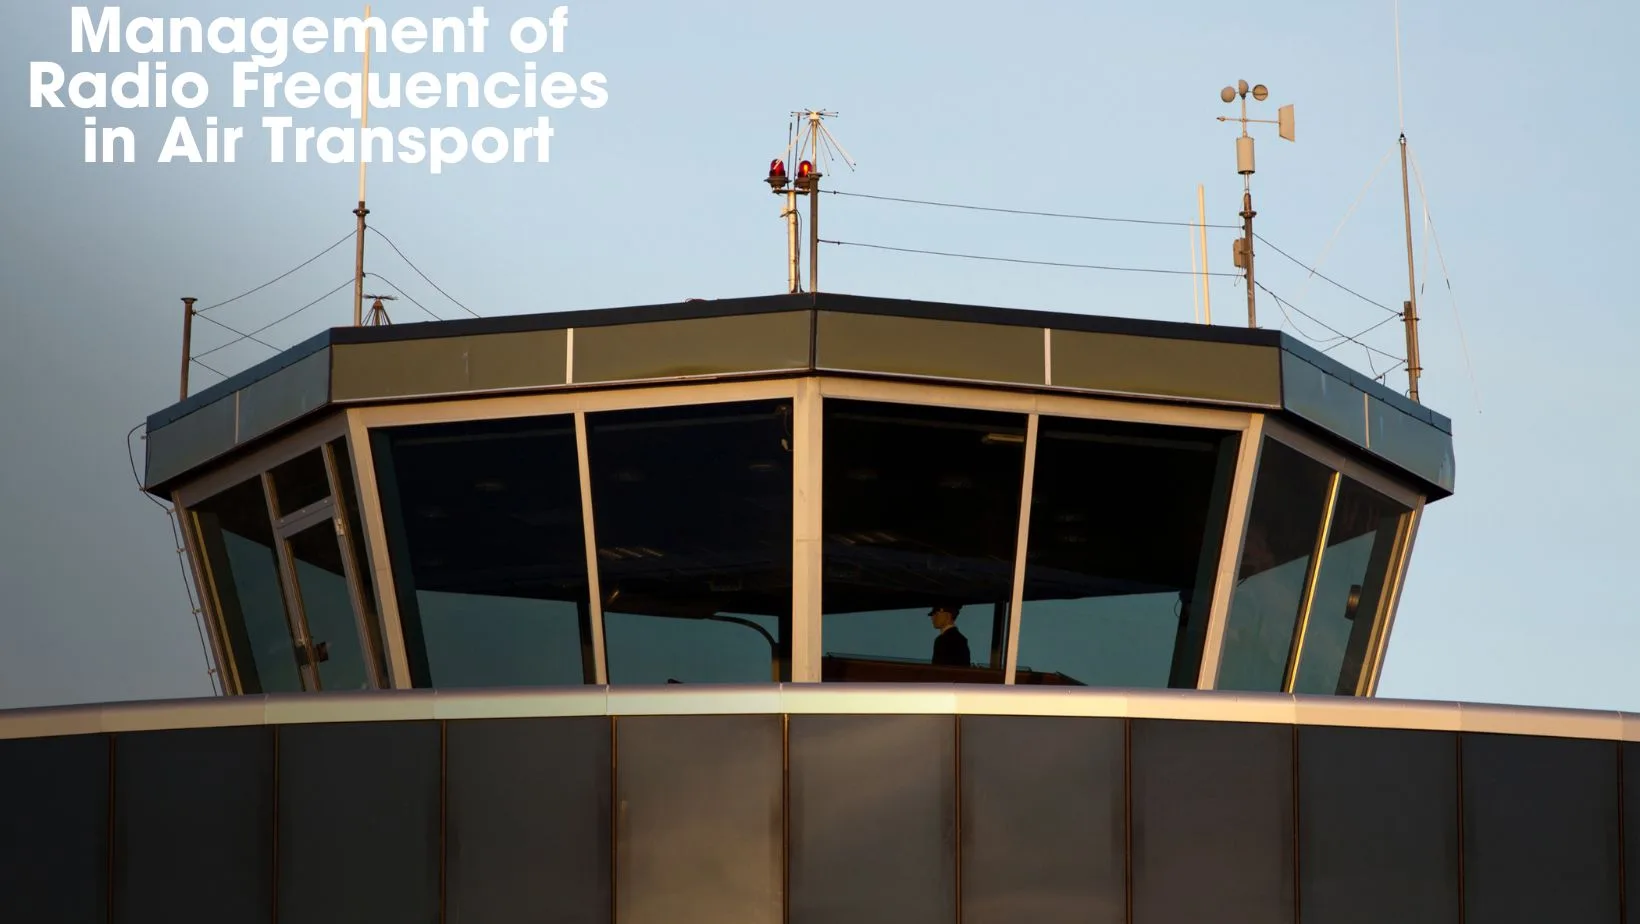 Management of Radio Frequencies in Air Transport